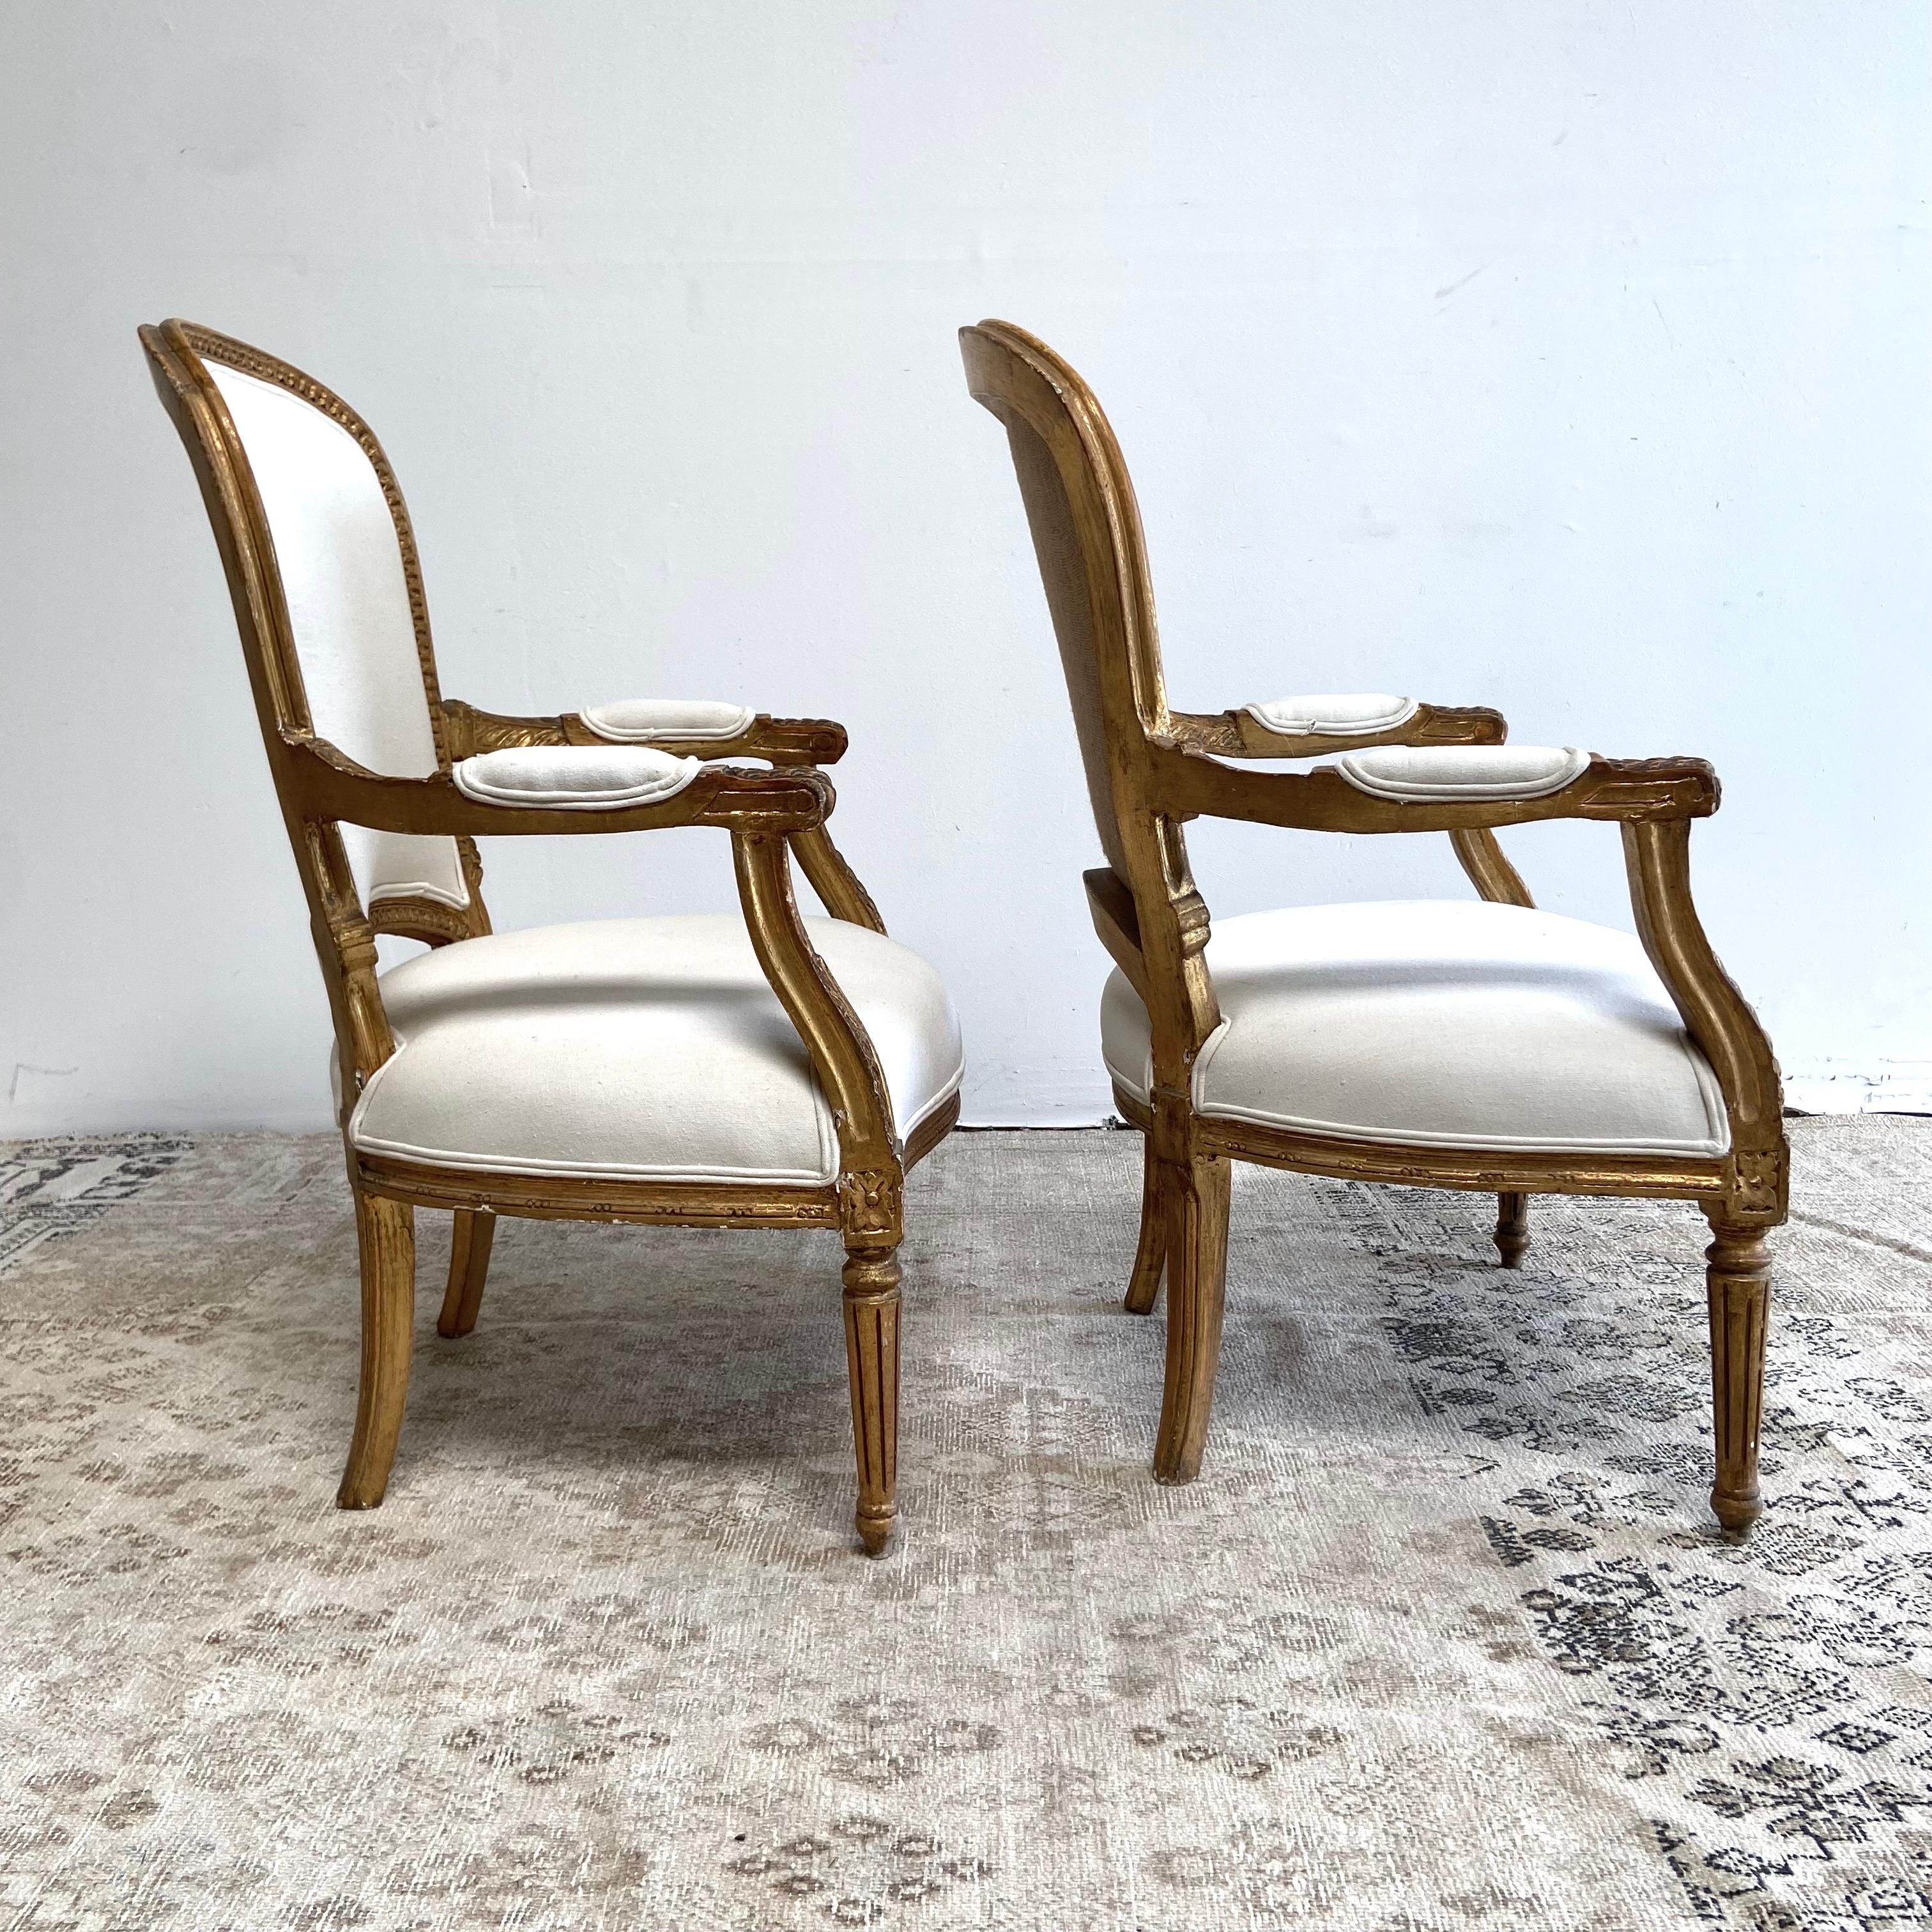 20th Century Vintage French Style Louis XVI Open Arm Chairs with Linen Upholstery For Sale